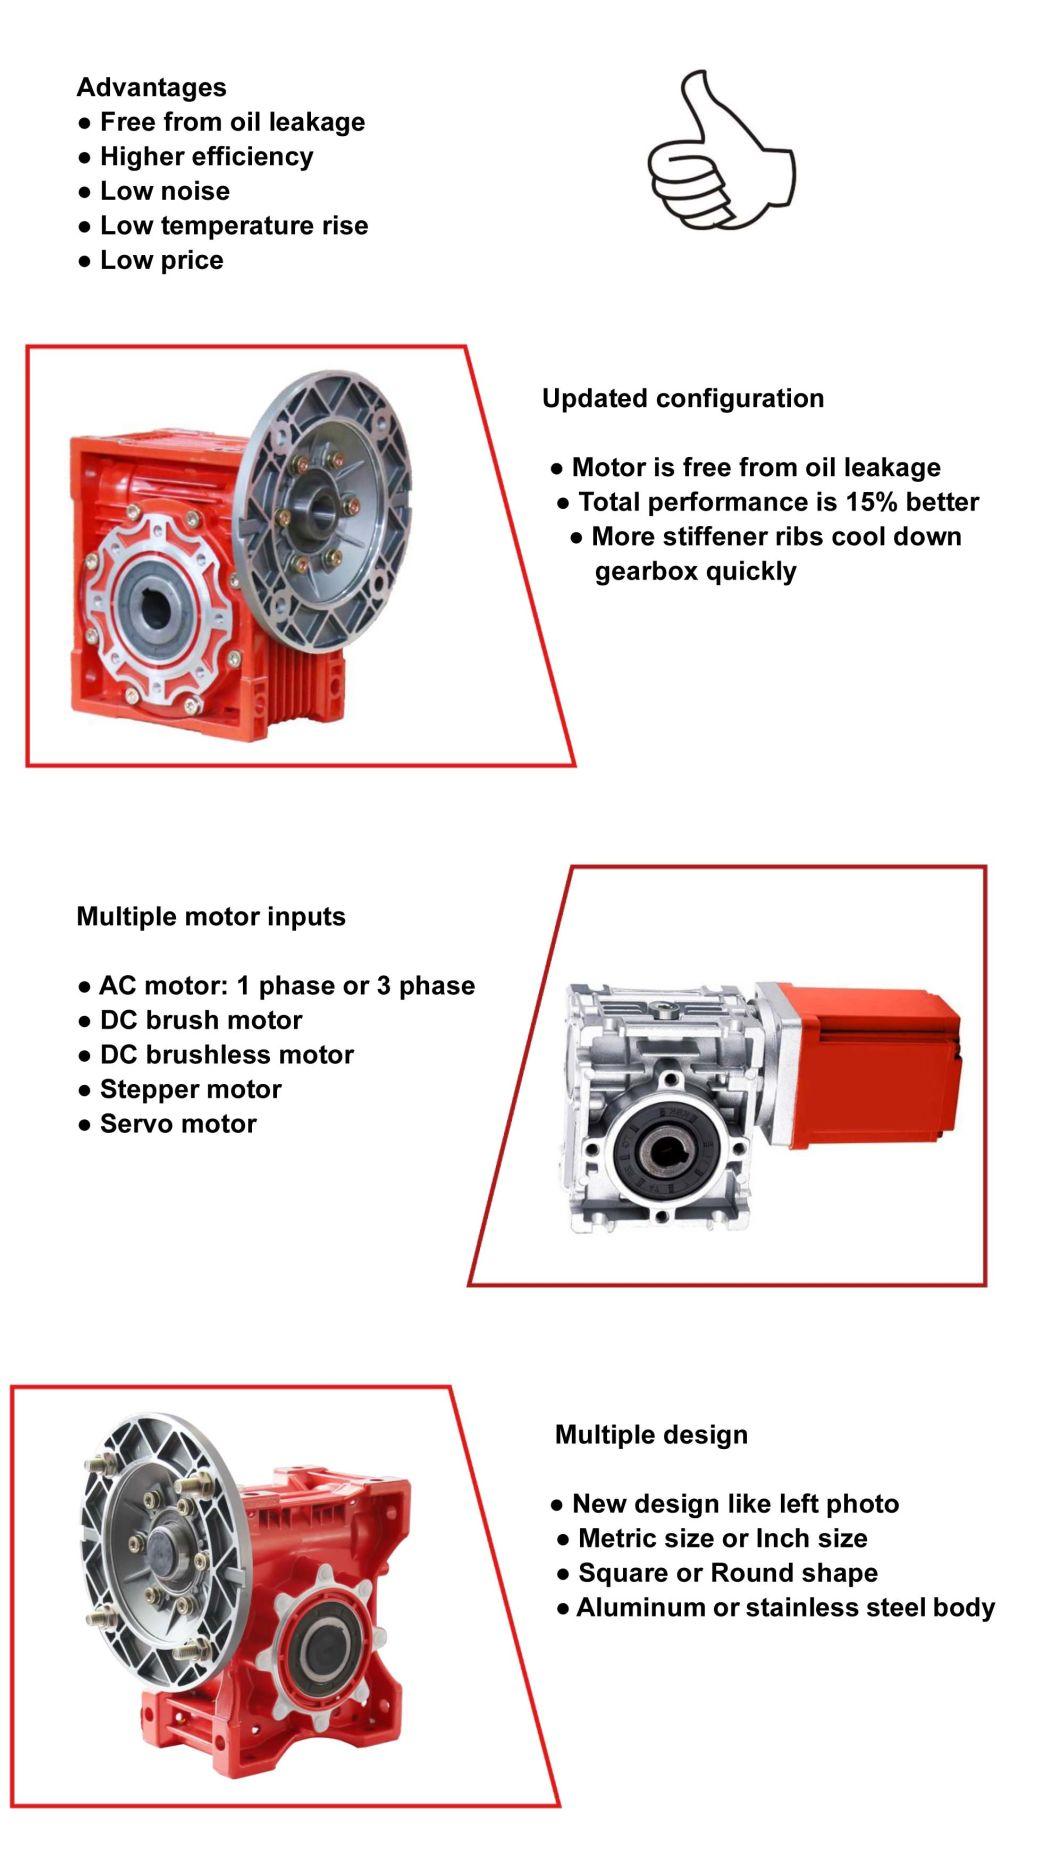 High Quality RV Series Worm 5: 1 Ratio Gearbox Motor and Gear Box/Marine Diesel Engine with Gearbox